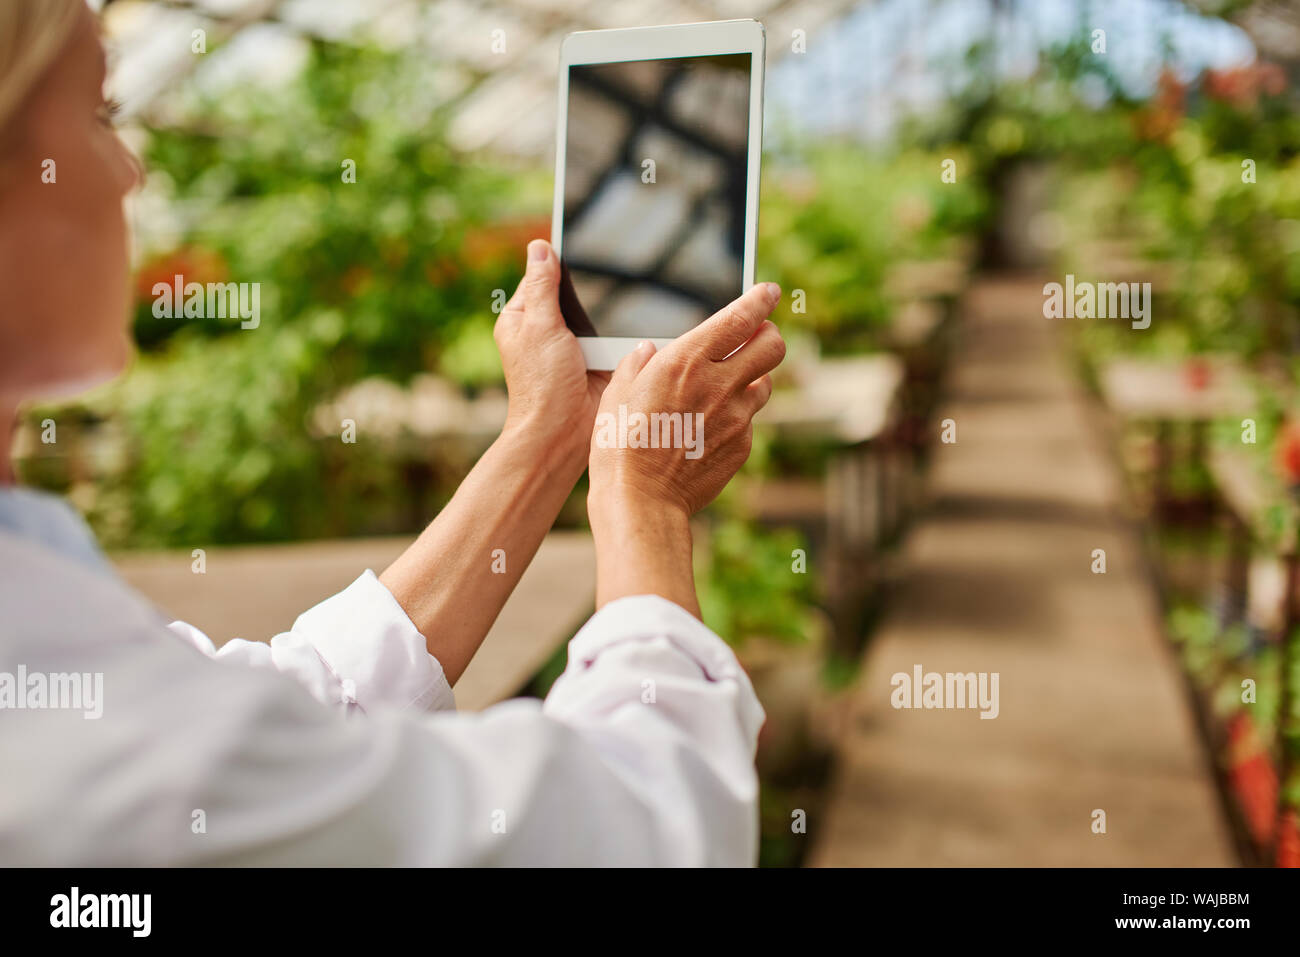 Farmer taking pictures of what is growing in the greenhouse using her tablet. Stock Photo